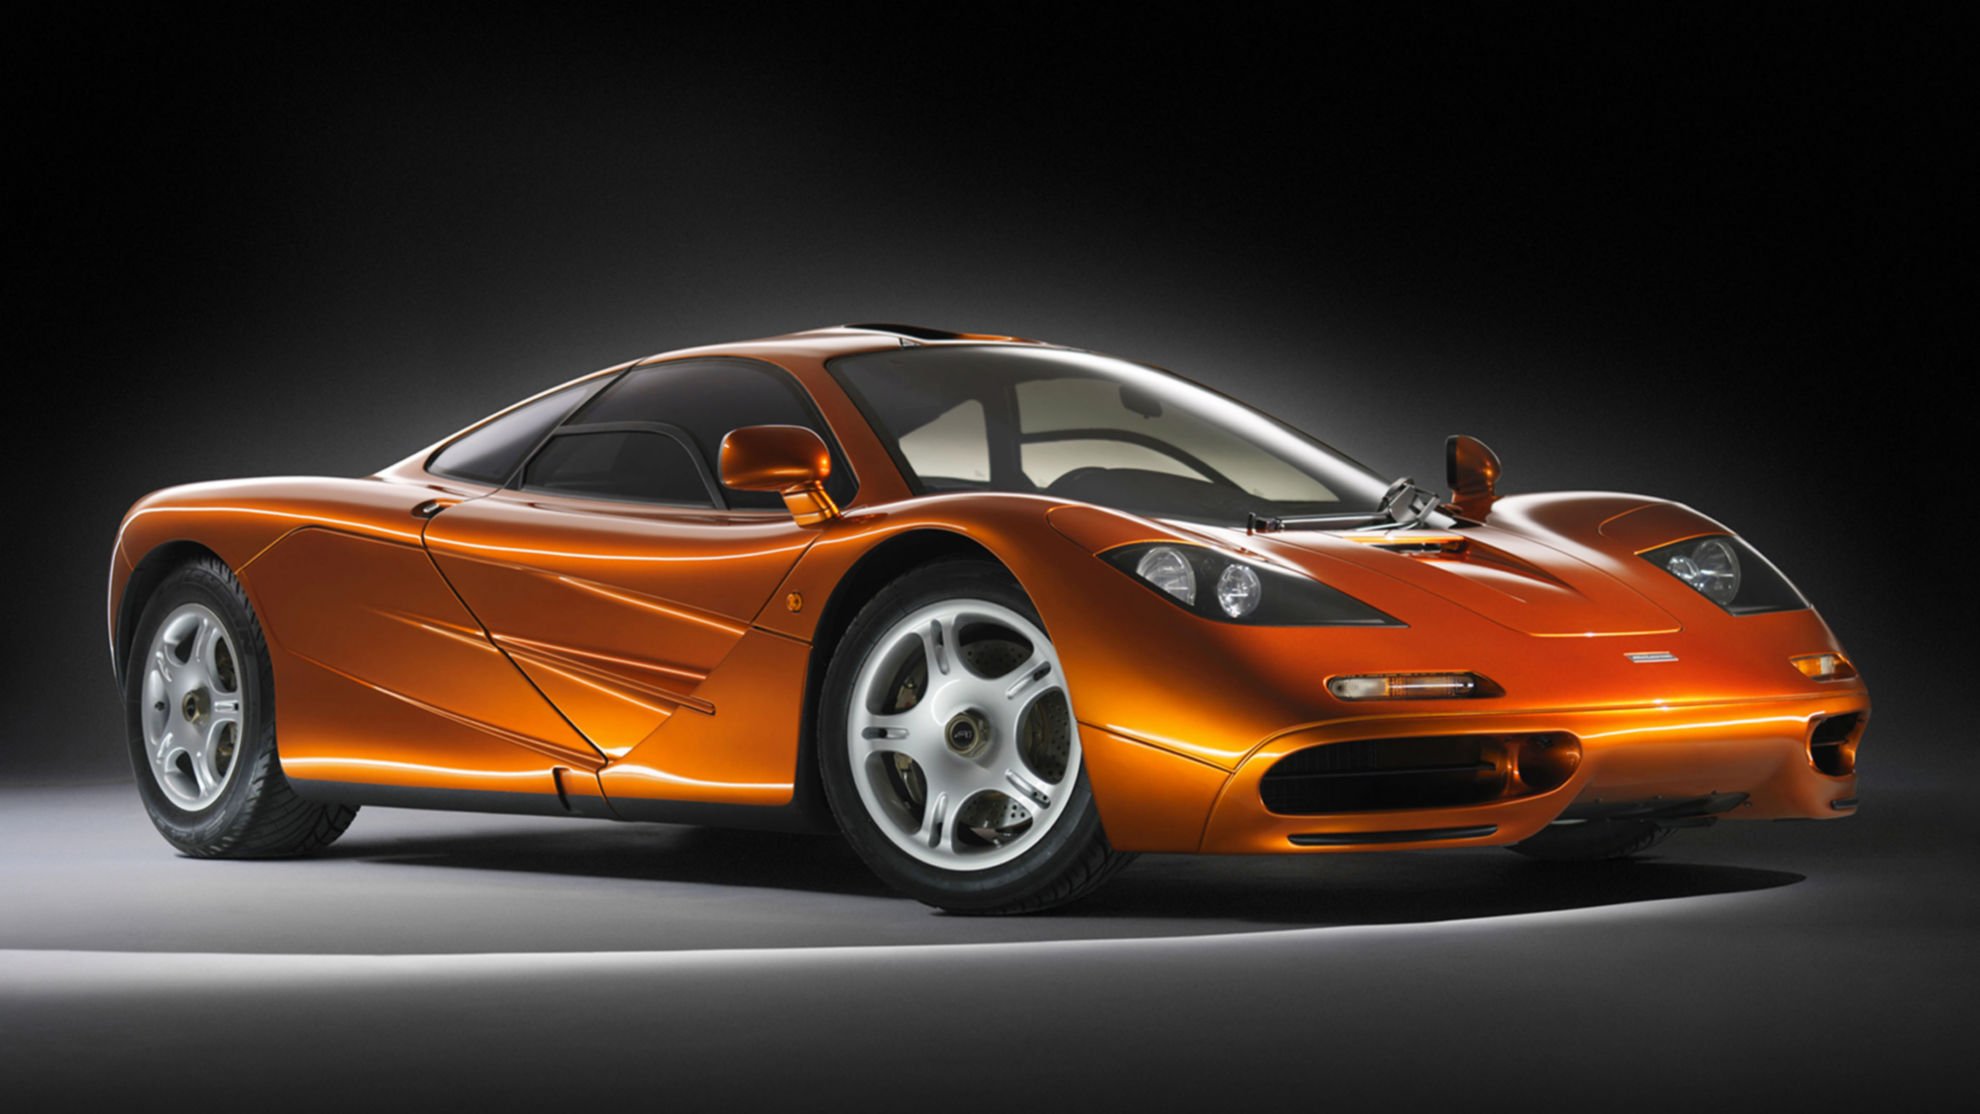 60 Million Worth Of McLaren F1s Comes On The Street Gearedtoyou